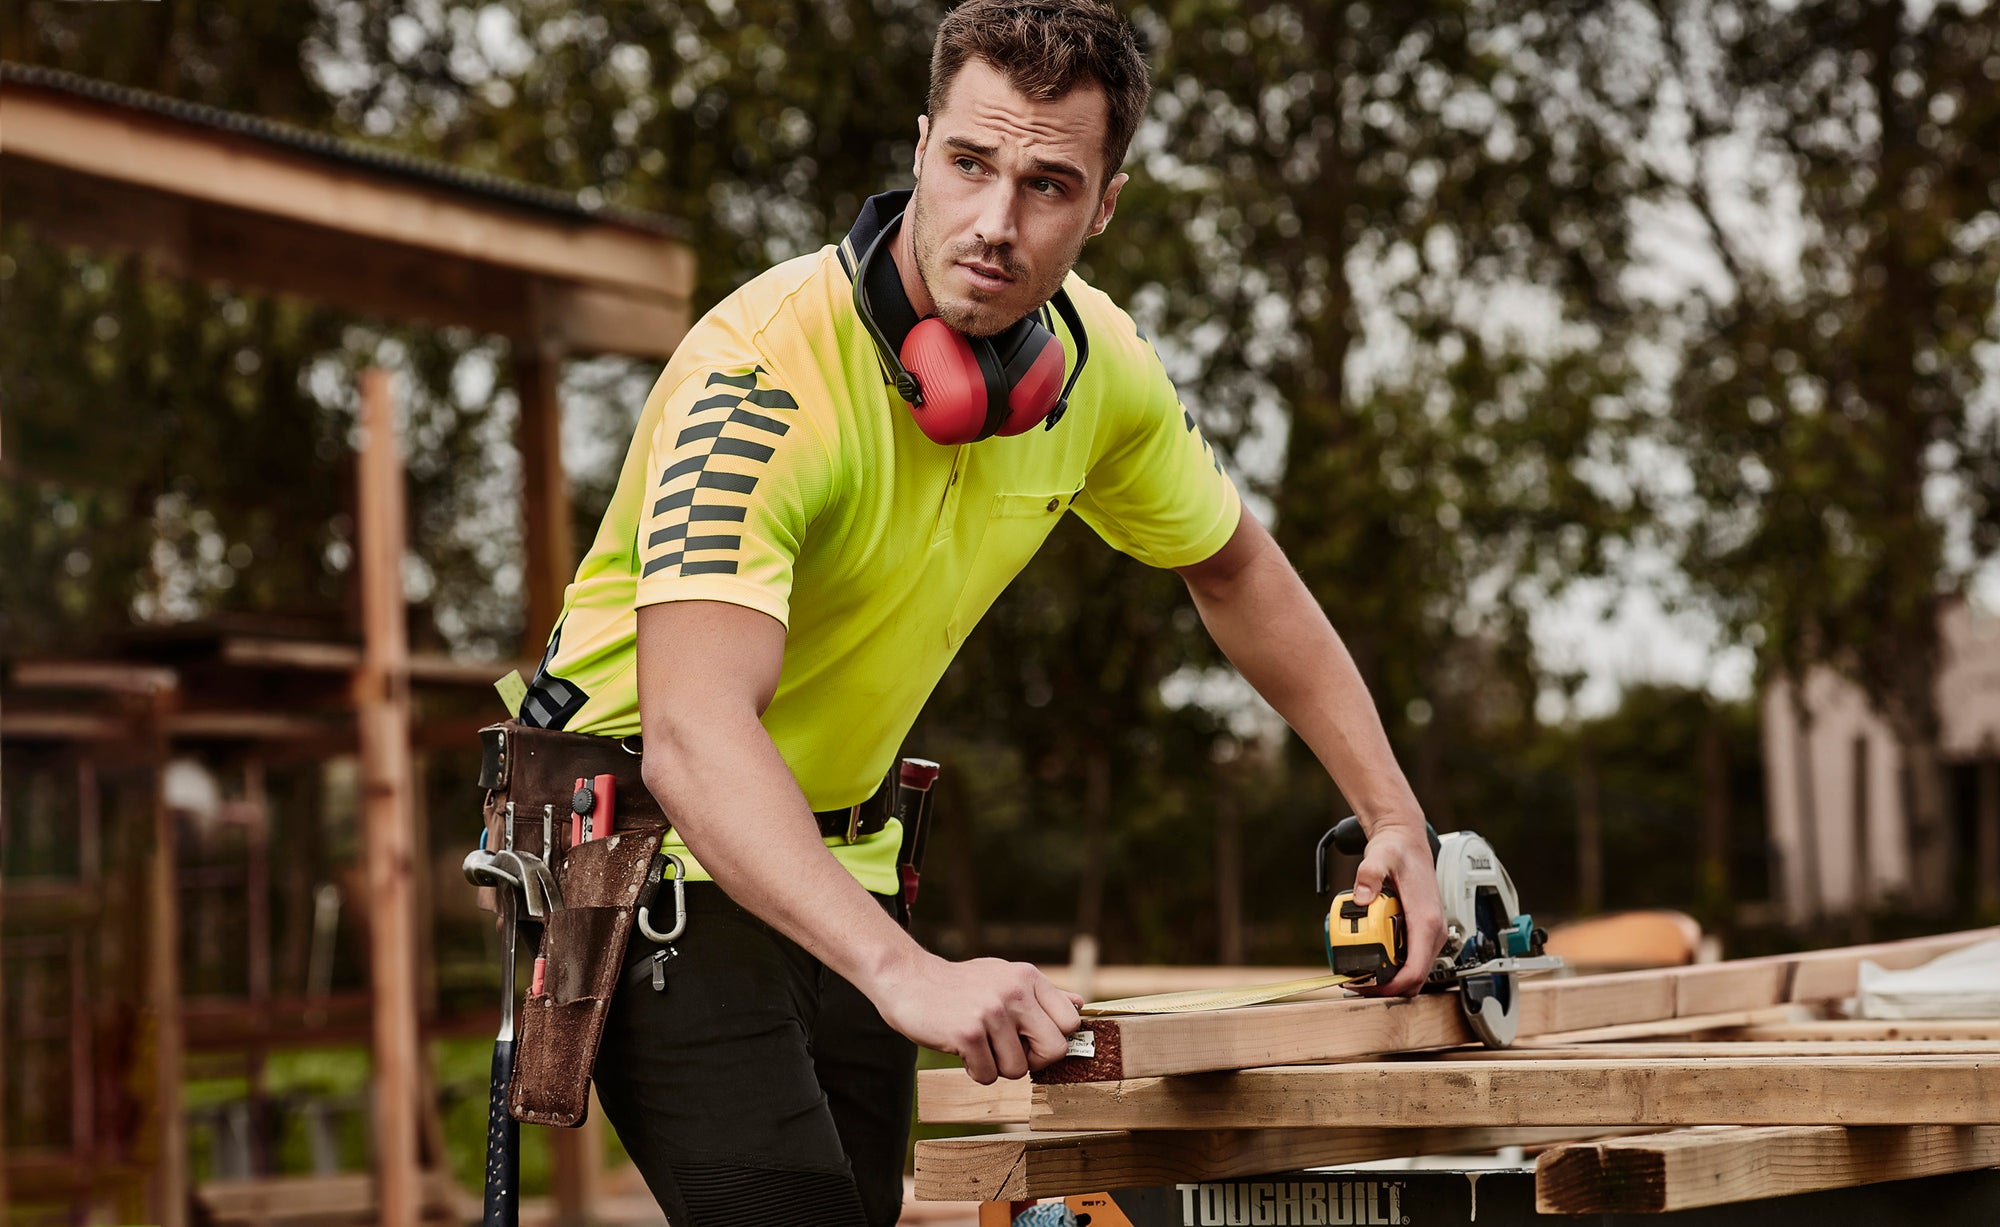 Best Protective Workwear for Summer